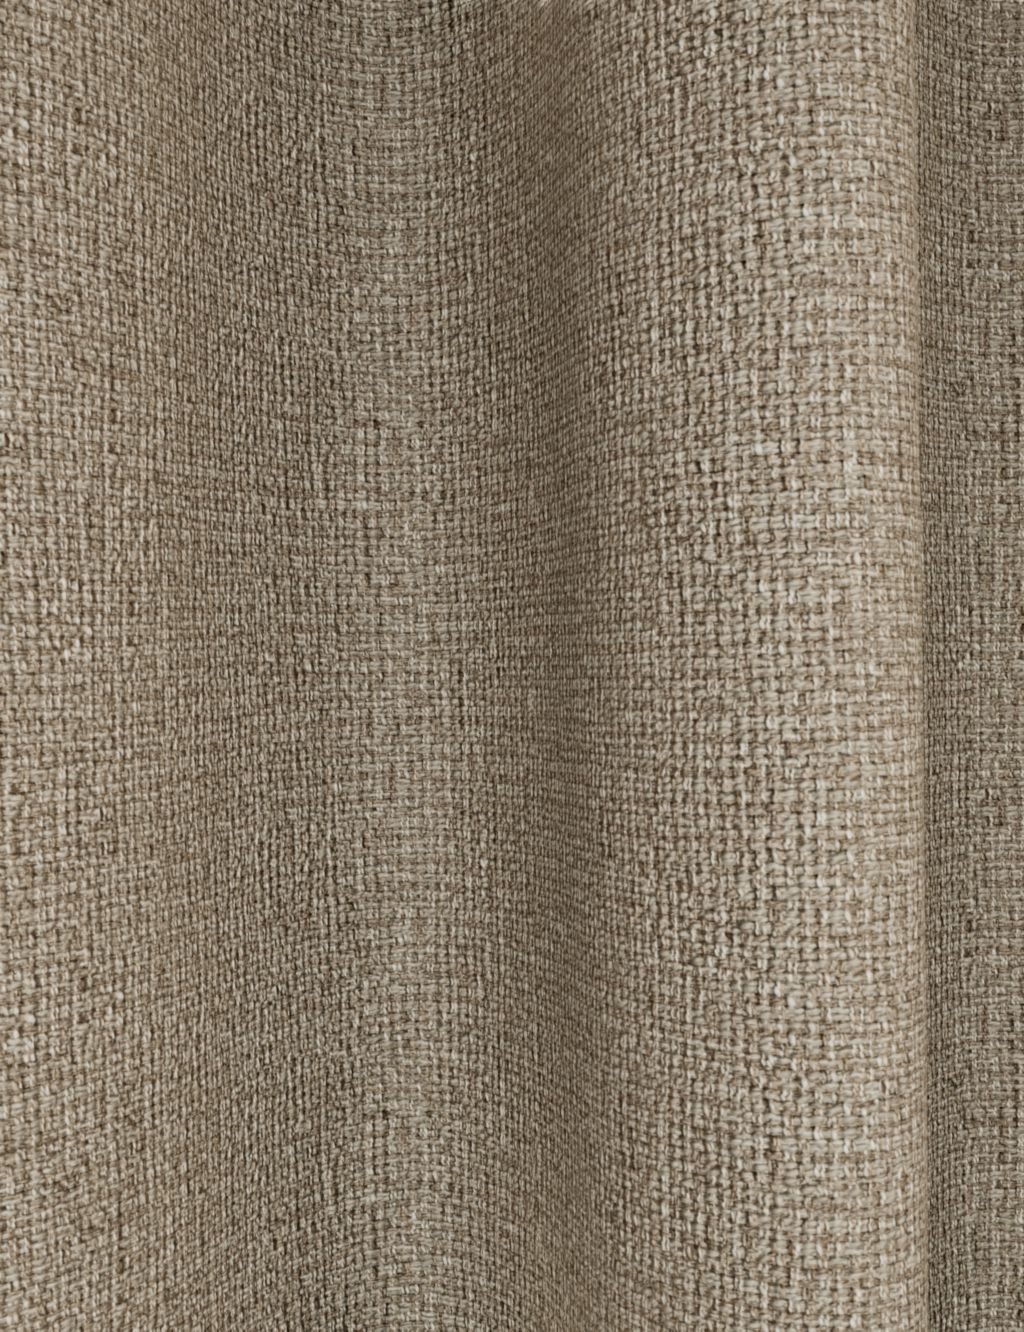 Heavyweight Woven Eyelet Blackout Curtains image 2